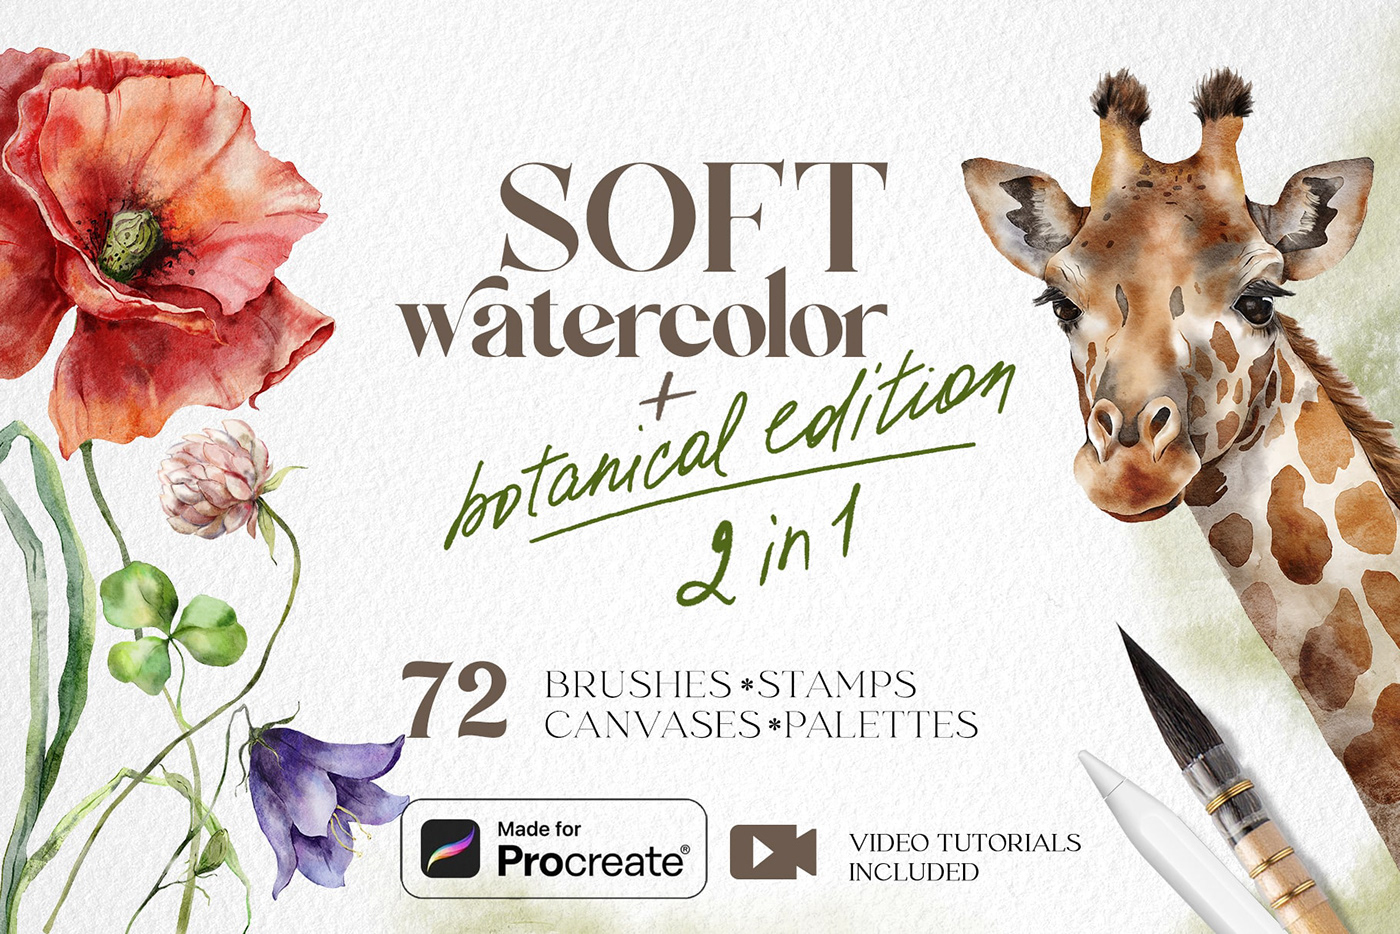 It’s realistic Procreate brushes — create amazing watercolor artwork without water, paper & brushes